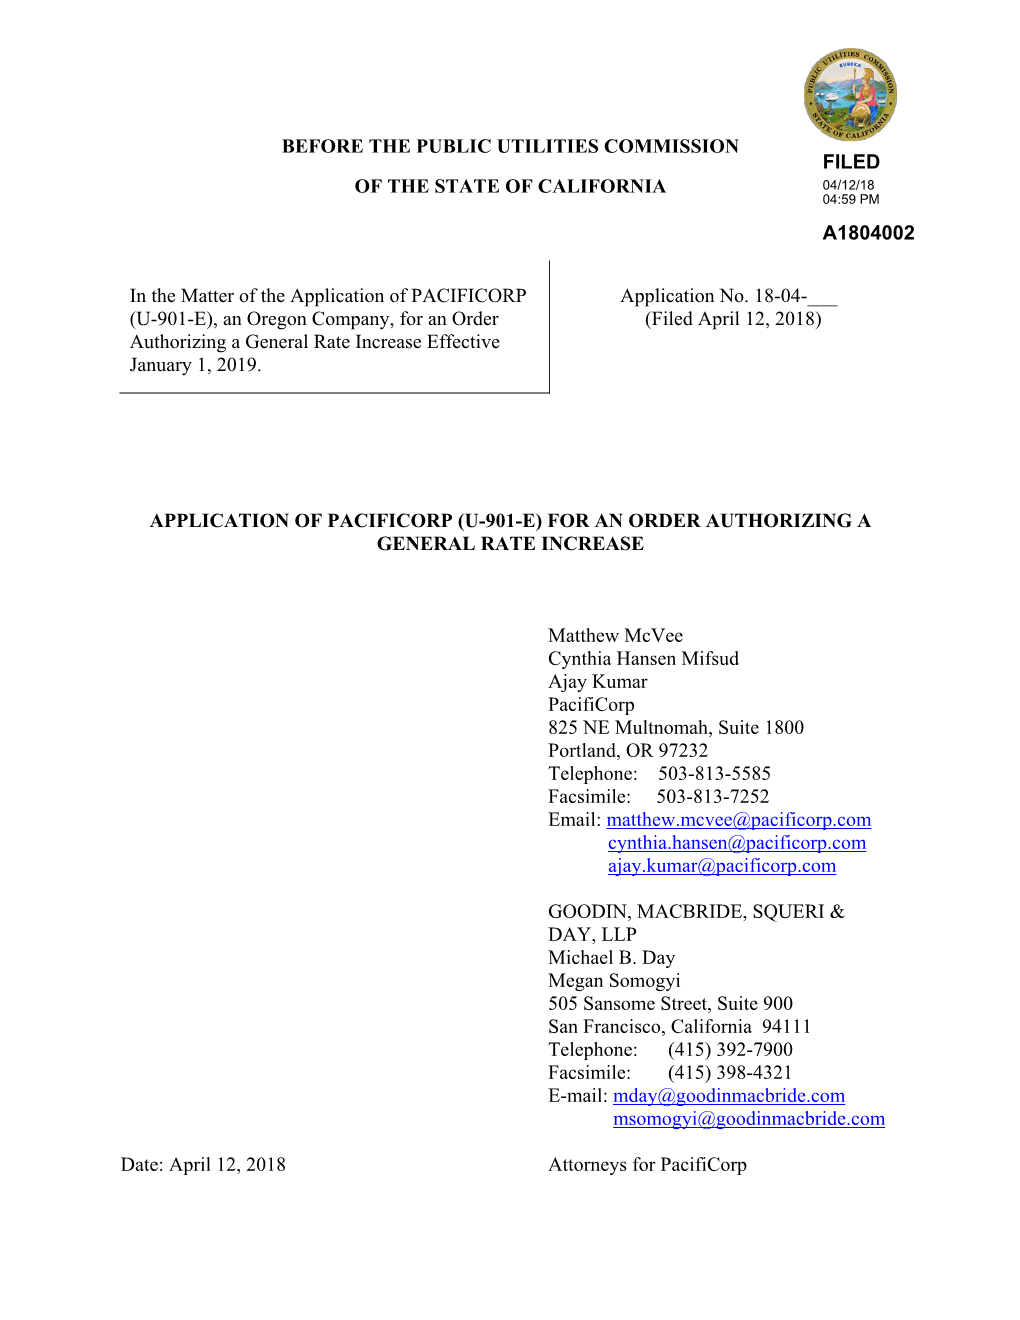 Before the Public Utilities Commission Filed of the State of California 04/12/18 04:59 Pm A1804002